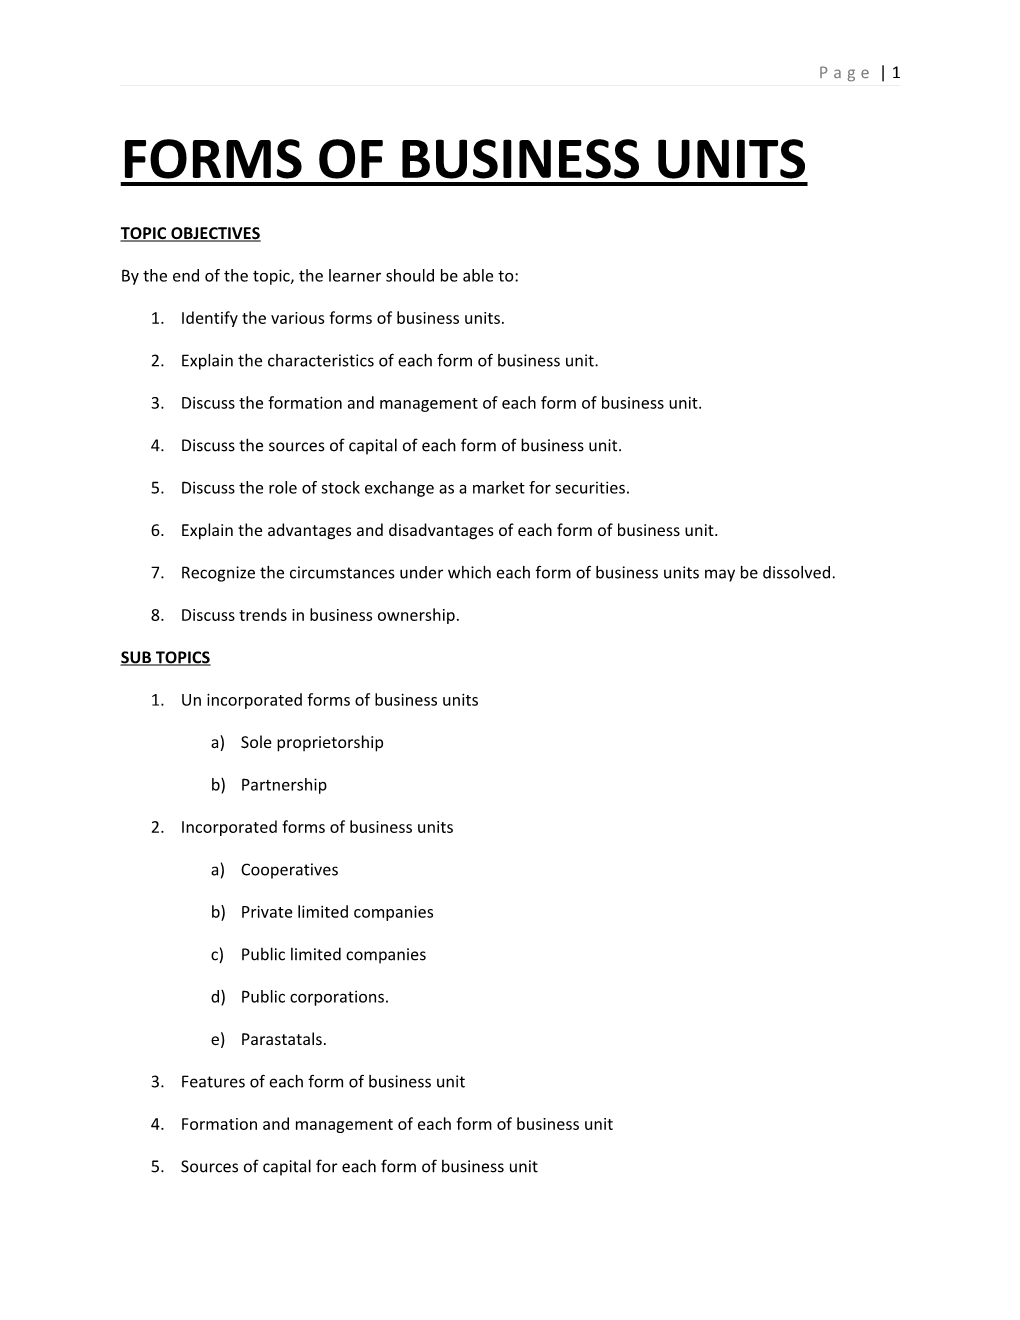 Forms of Business Units